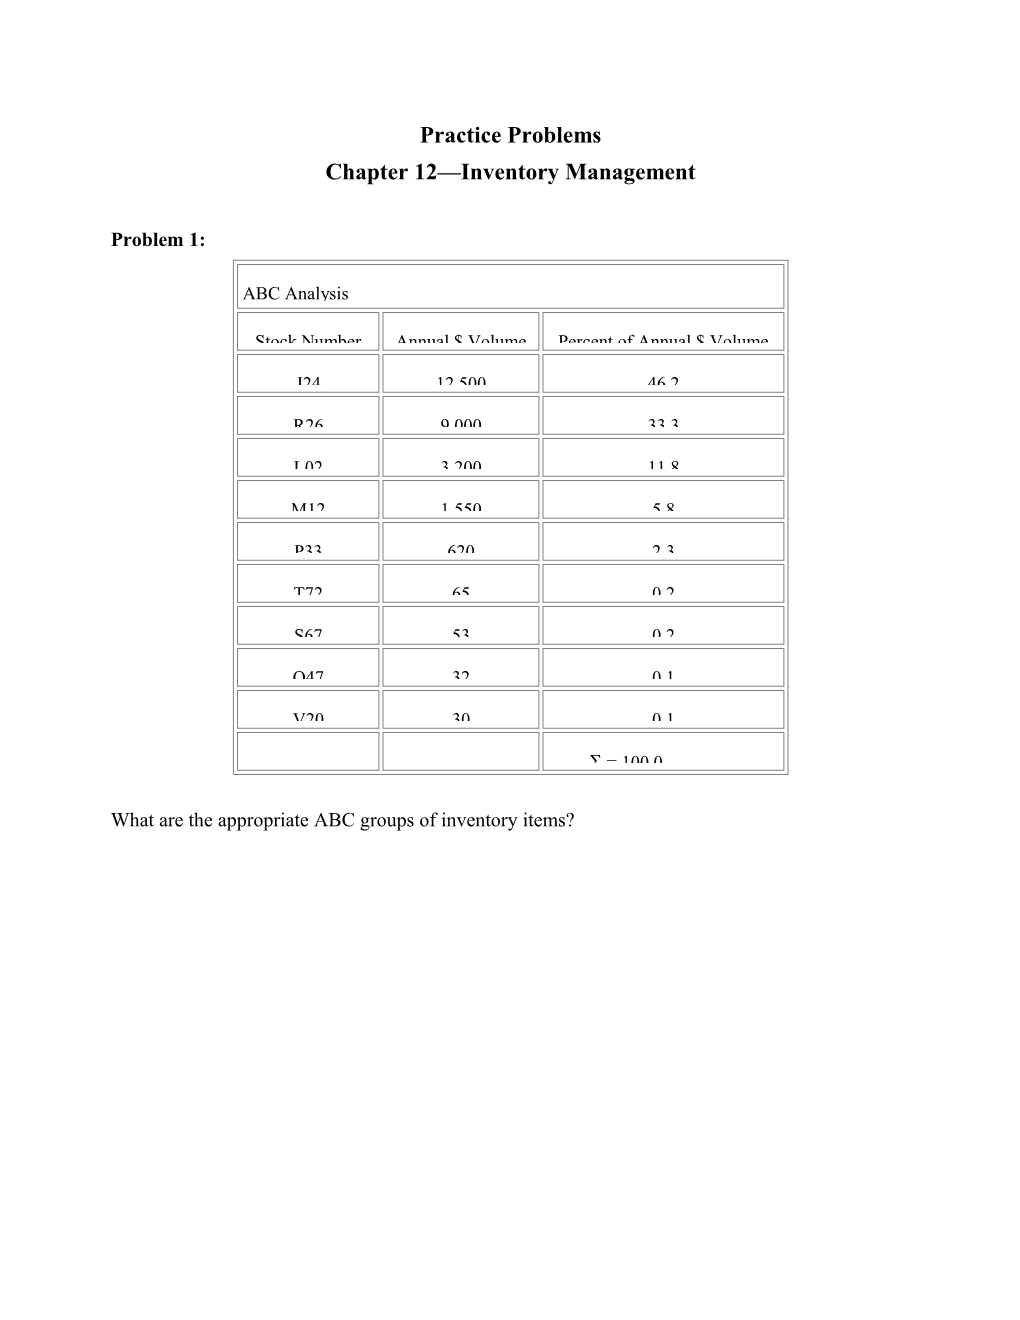 Practice Problems: Chapter 12, Inventory Management